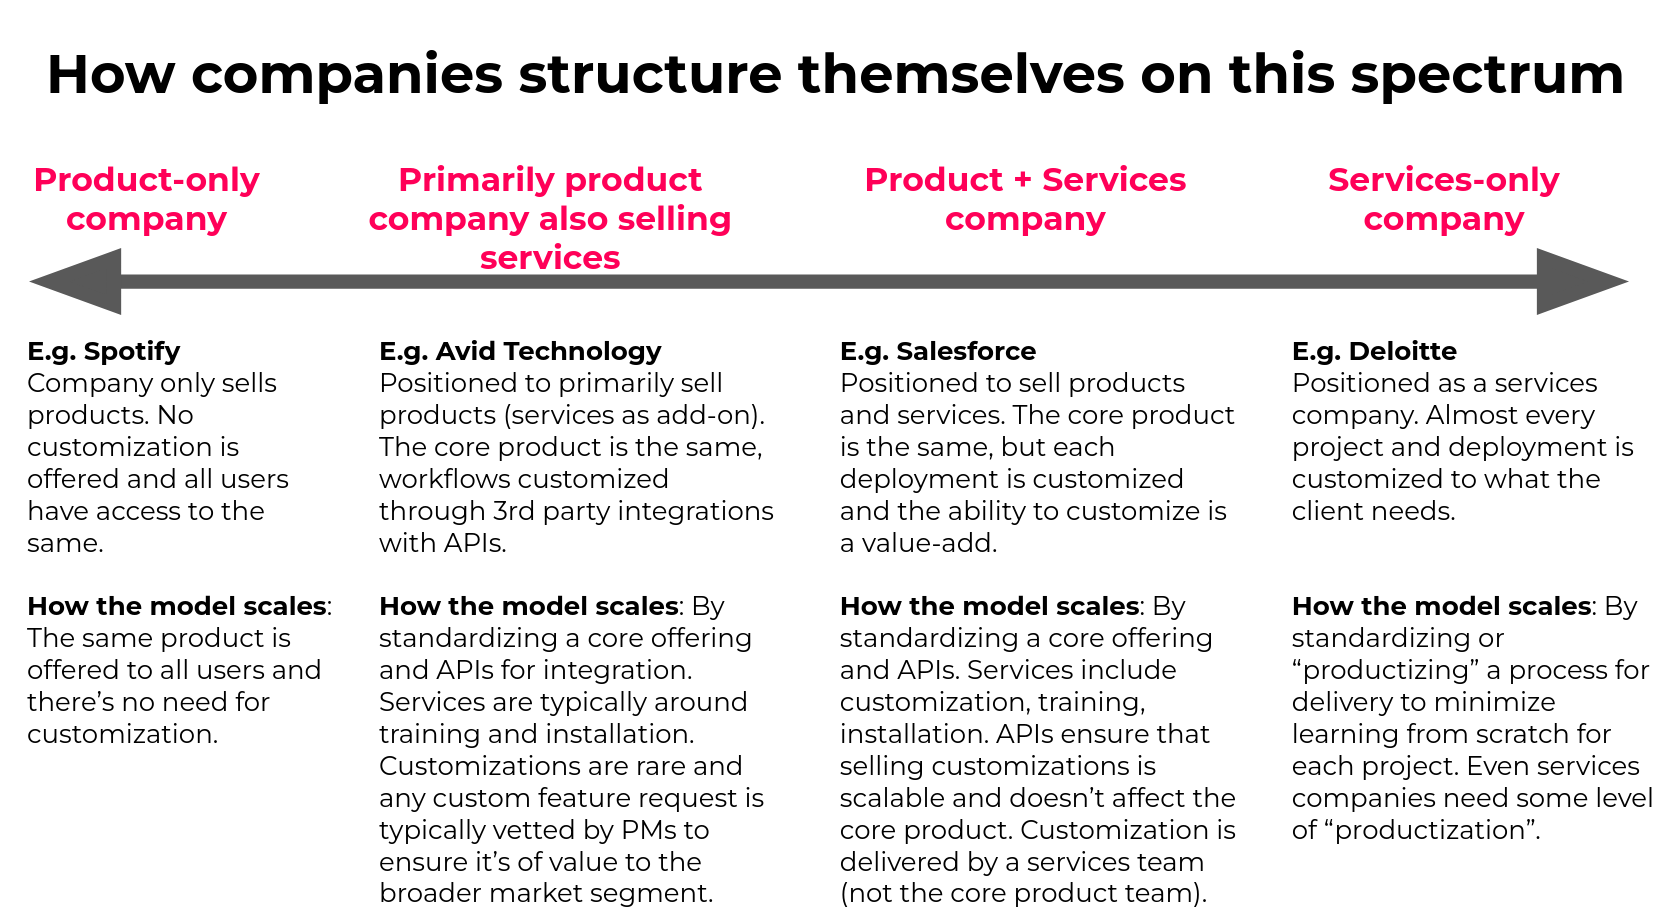 Spectrum of product-only to services-only company